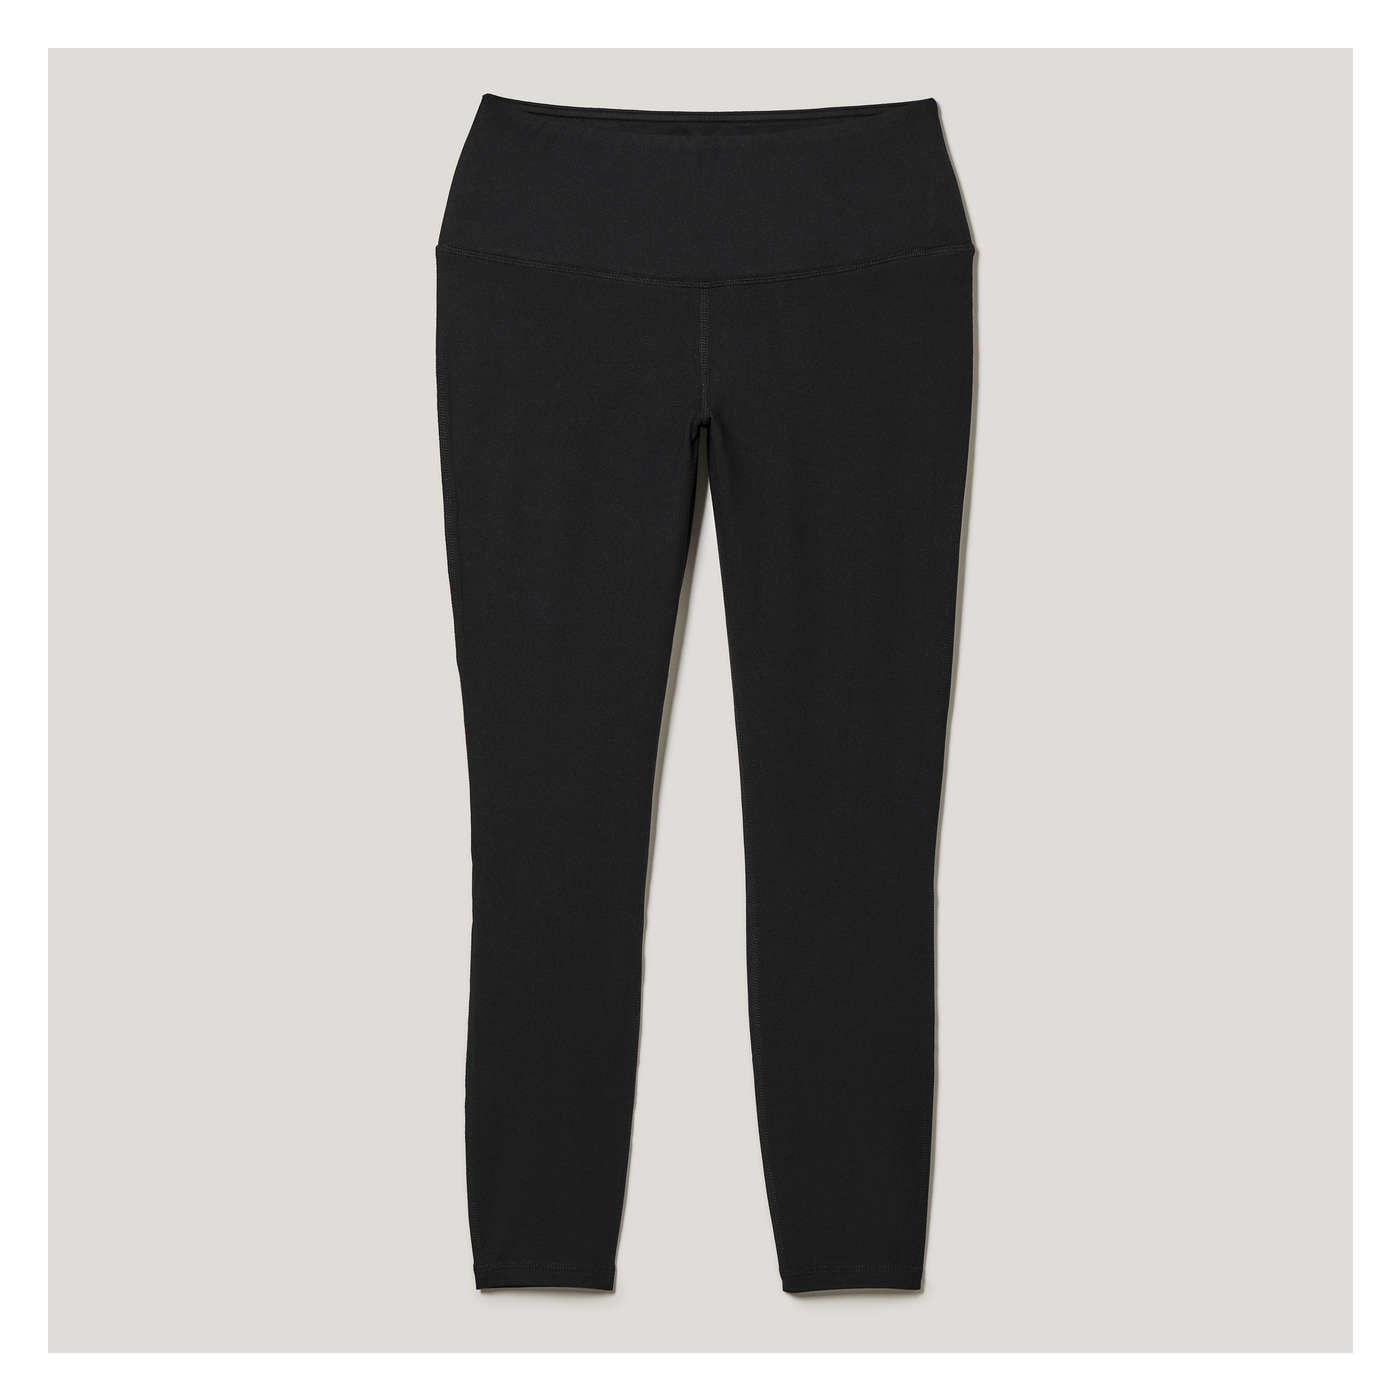 Under Armour Leggings Black - $20 (42% Off Retail) - From Donna